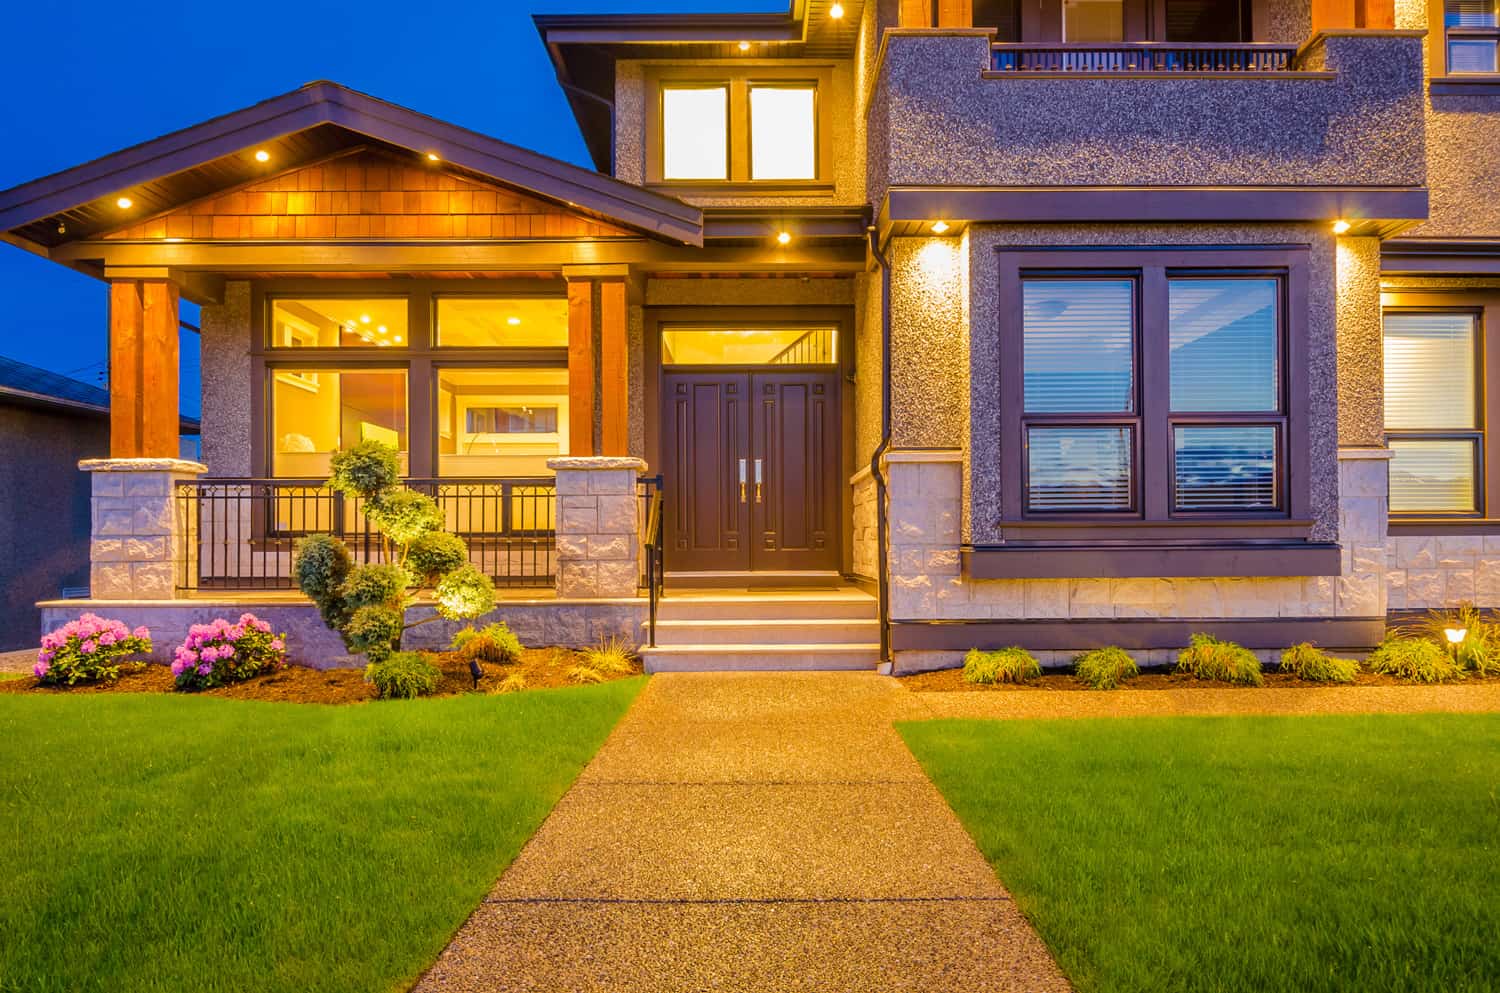 Entrance of a house at dusk in Vancouver, Canada.